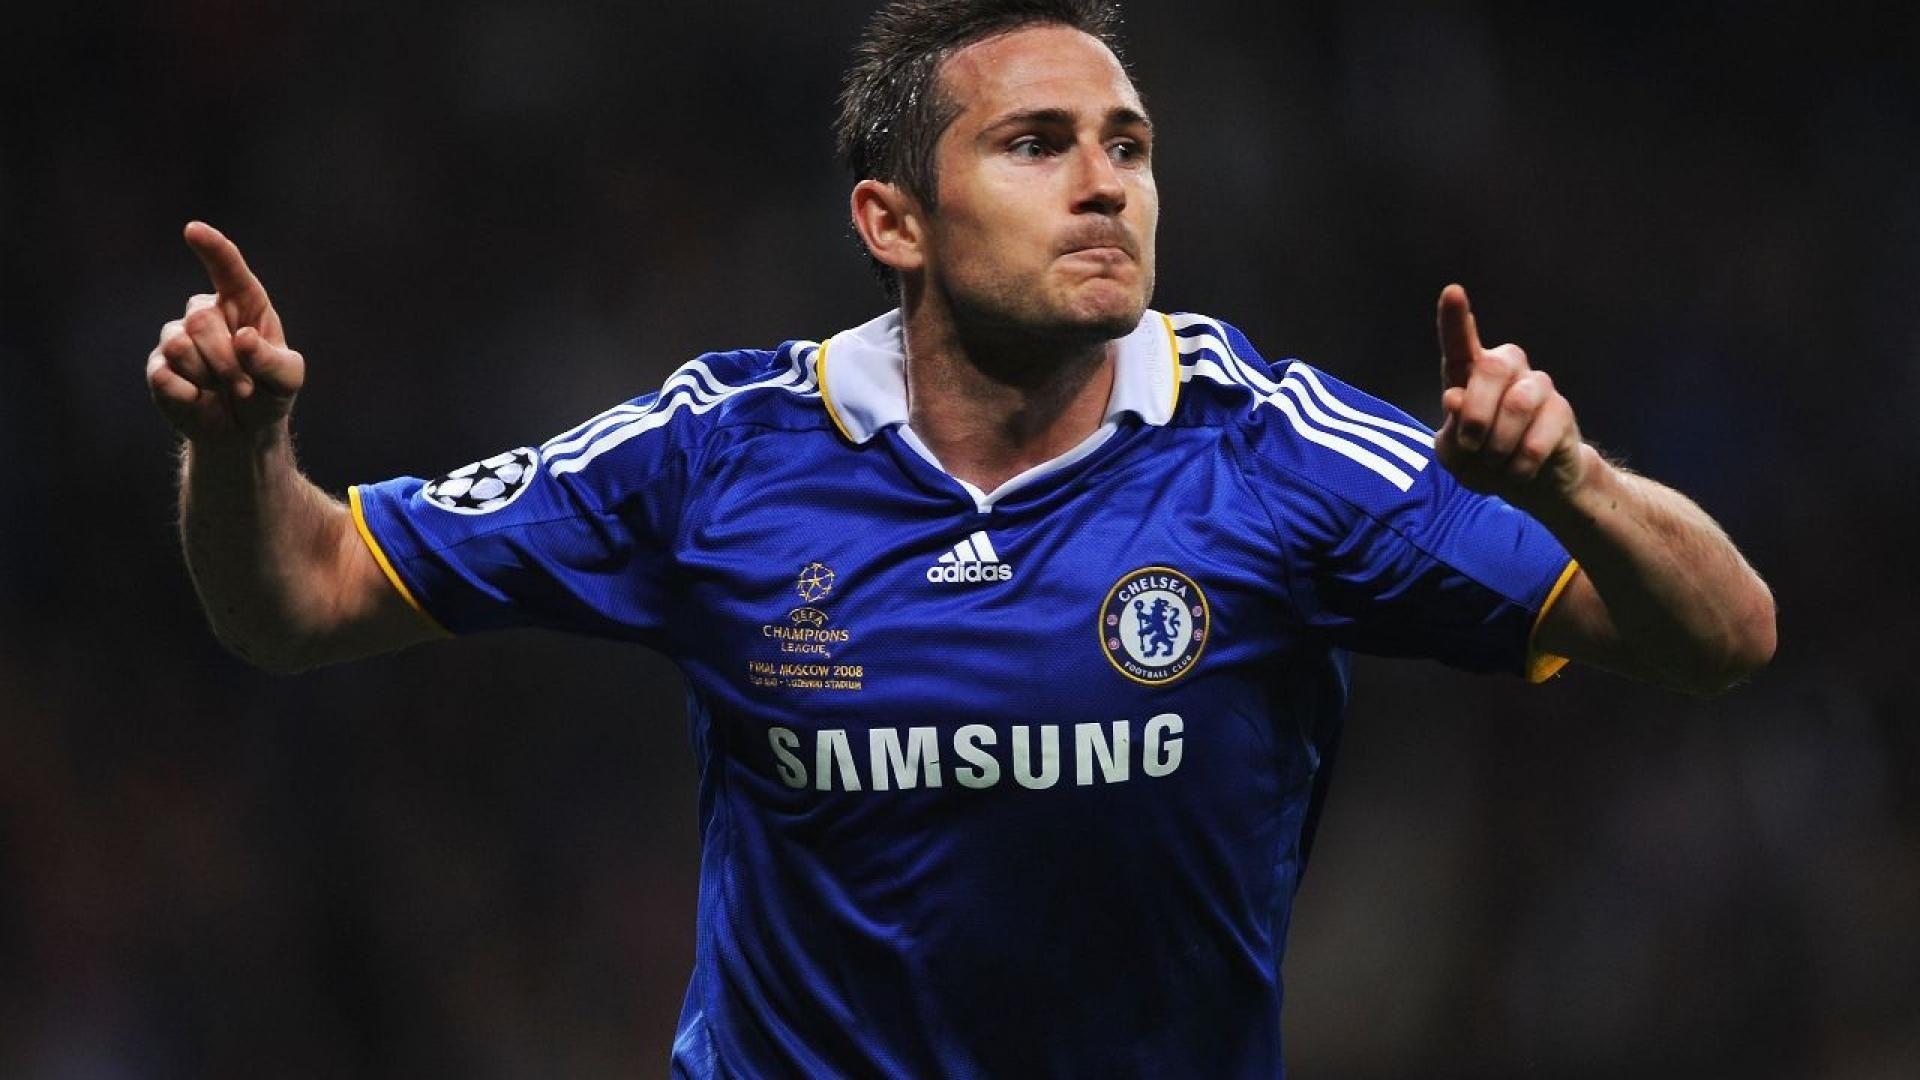 Frank Lampard Football Players HD Wallpapers